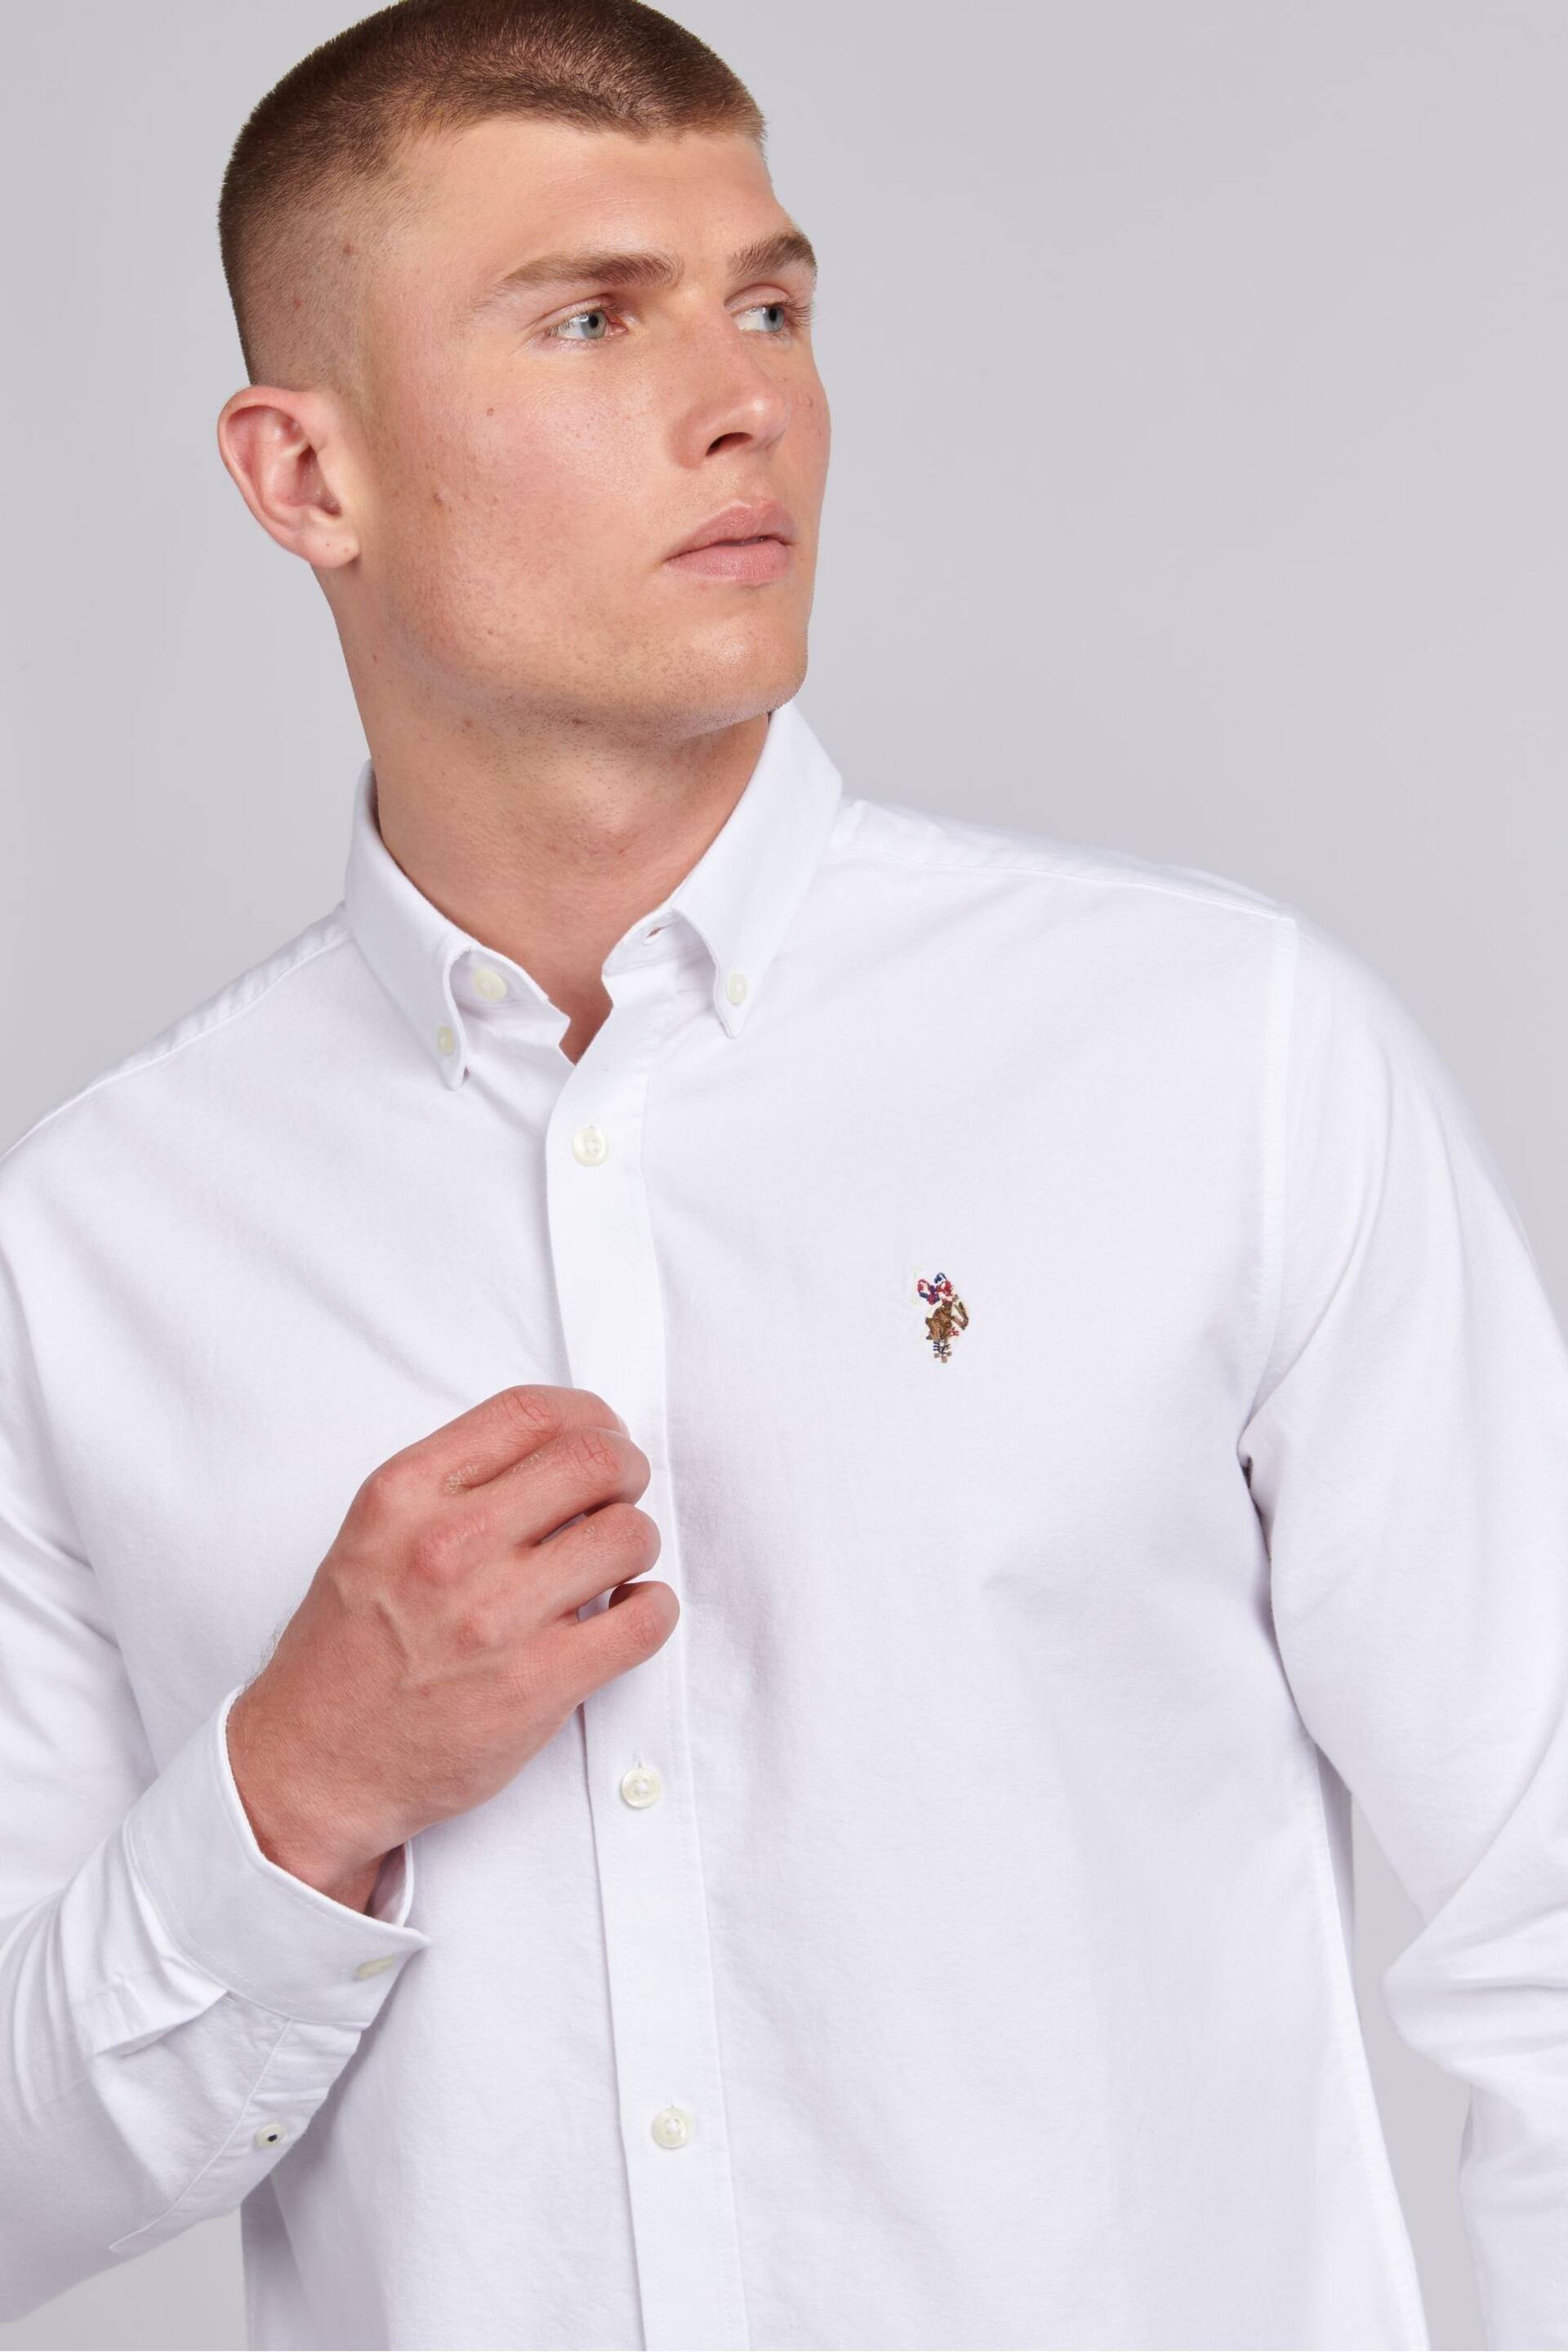 U.S. Polo Assn. Mens Peached Oxford Shirt - Image 2 of 6